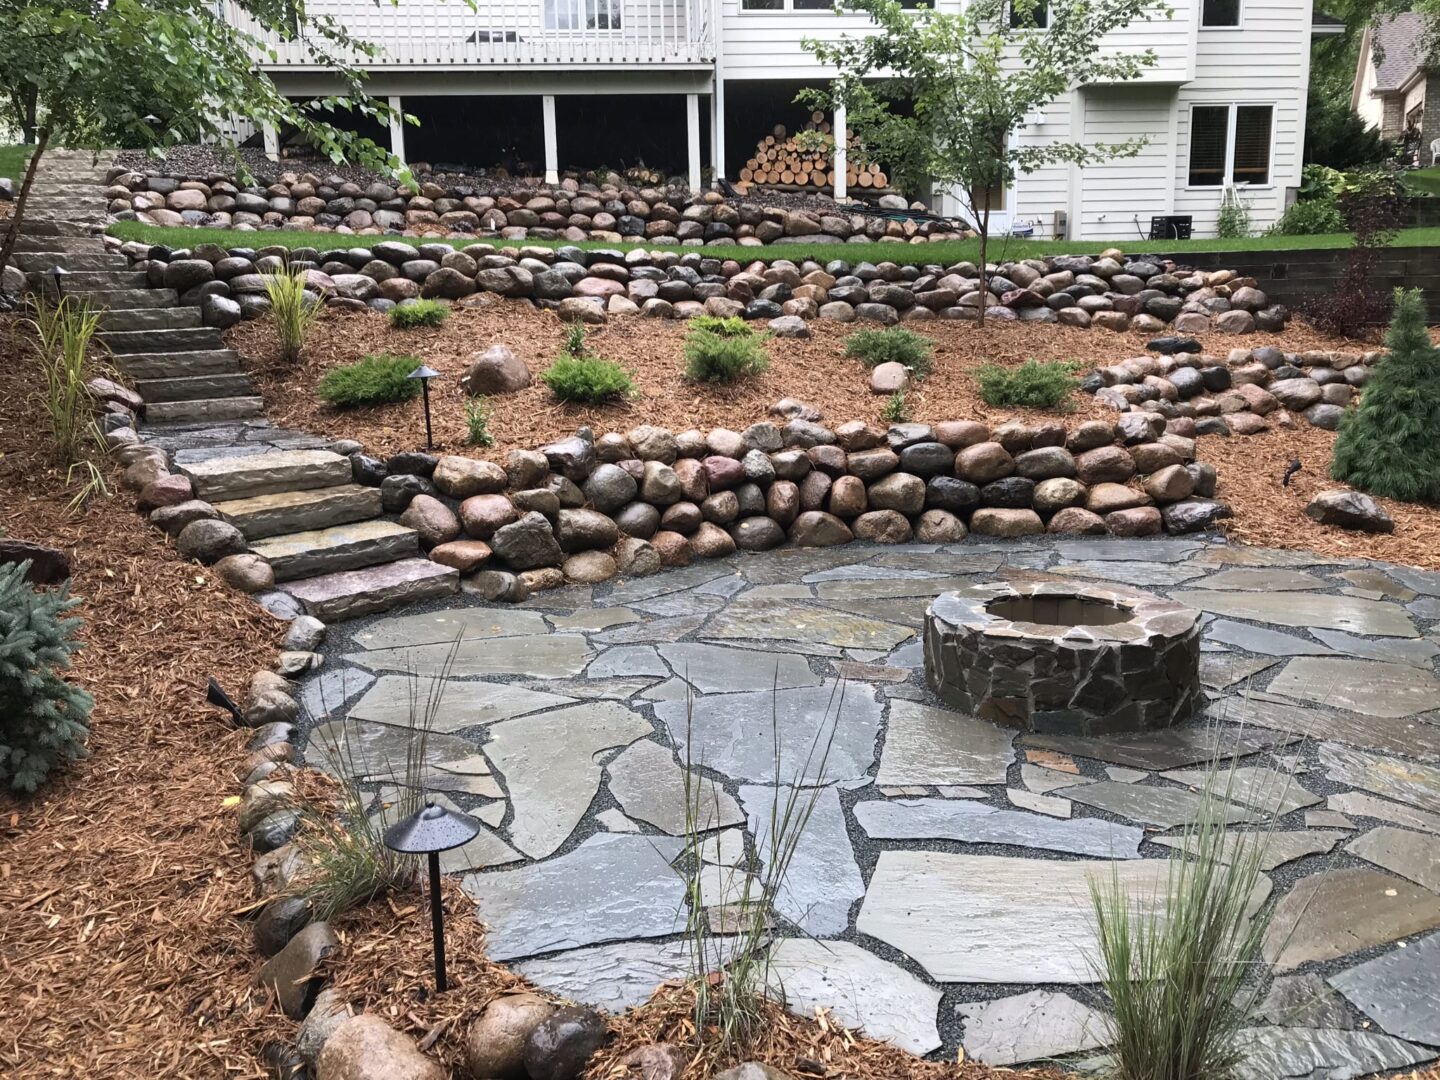 Landscaping work on a wide outdoor space